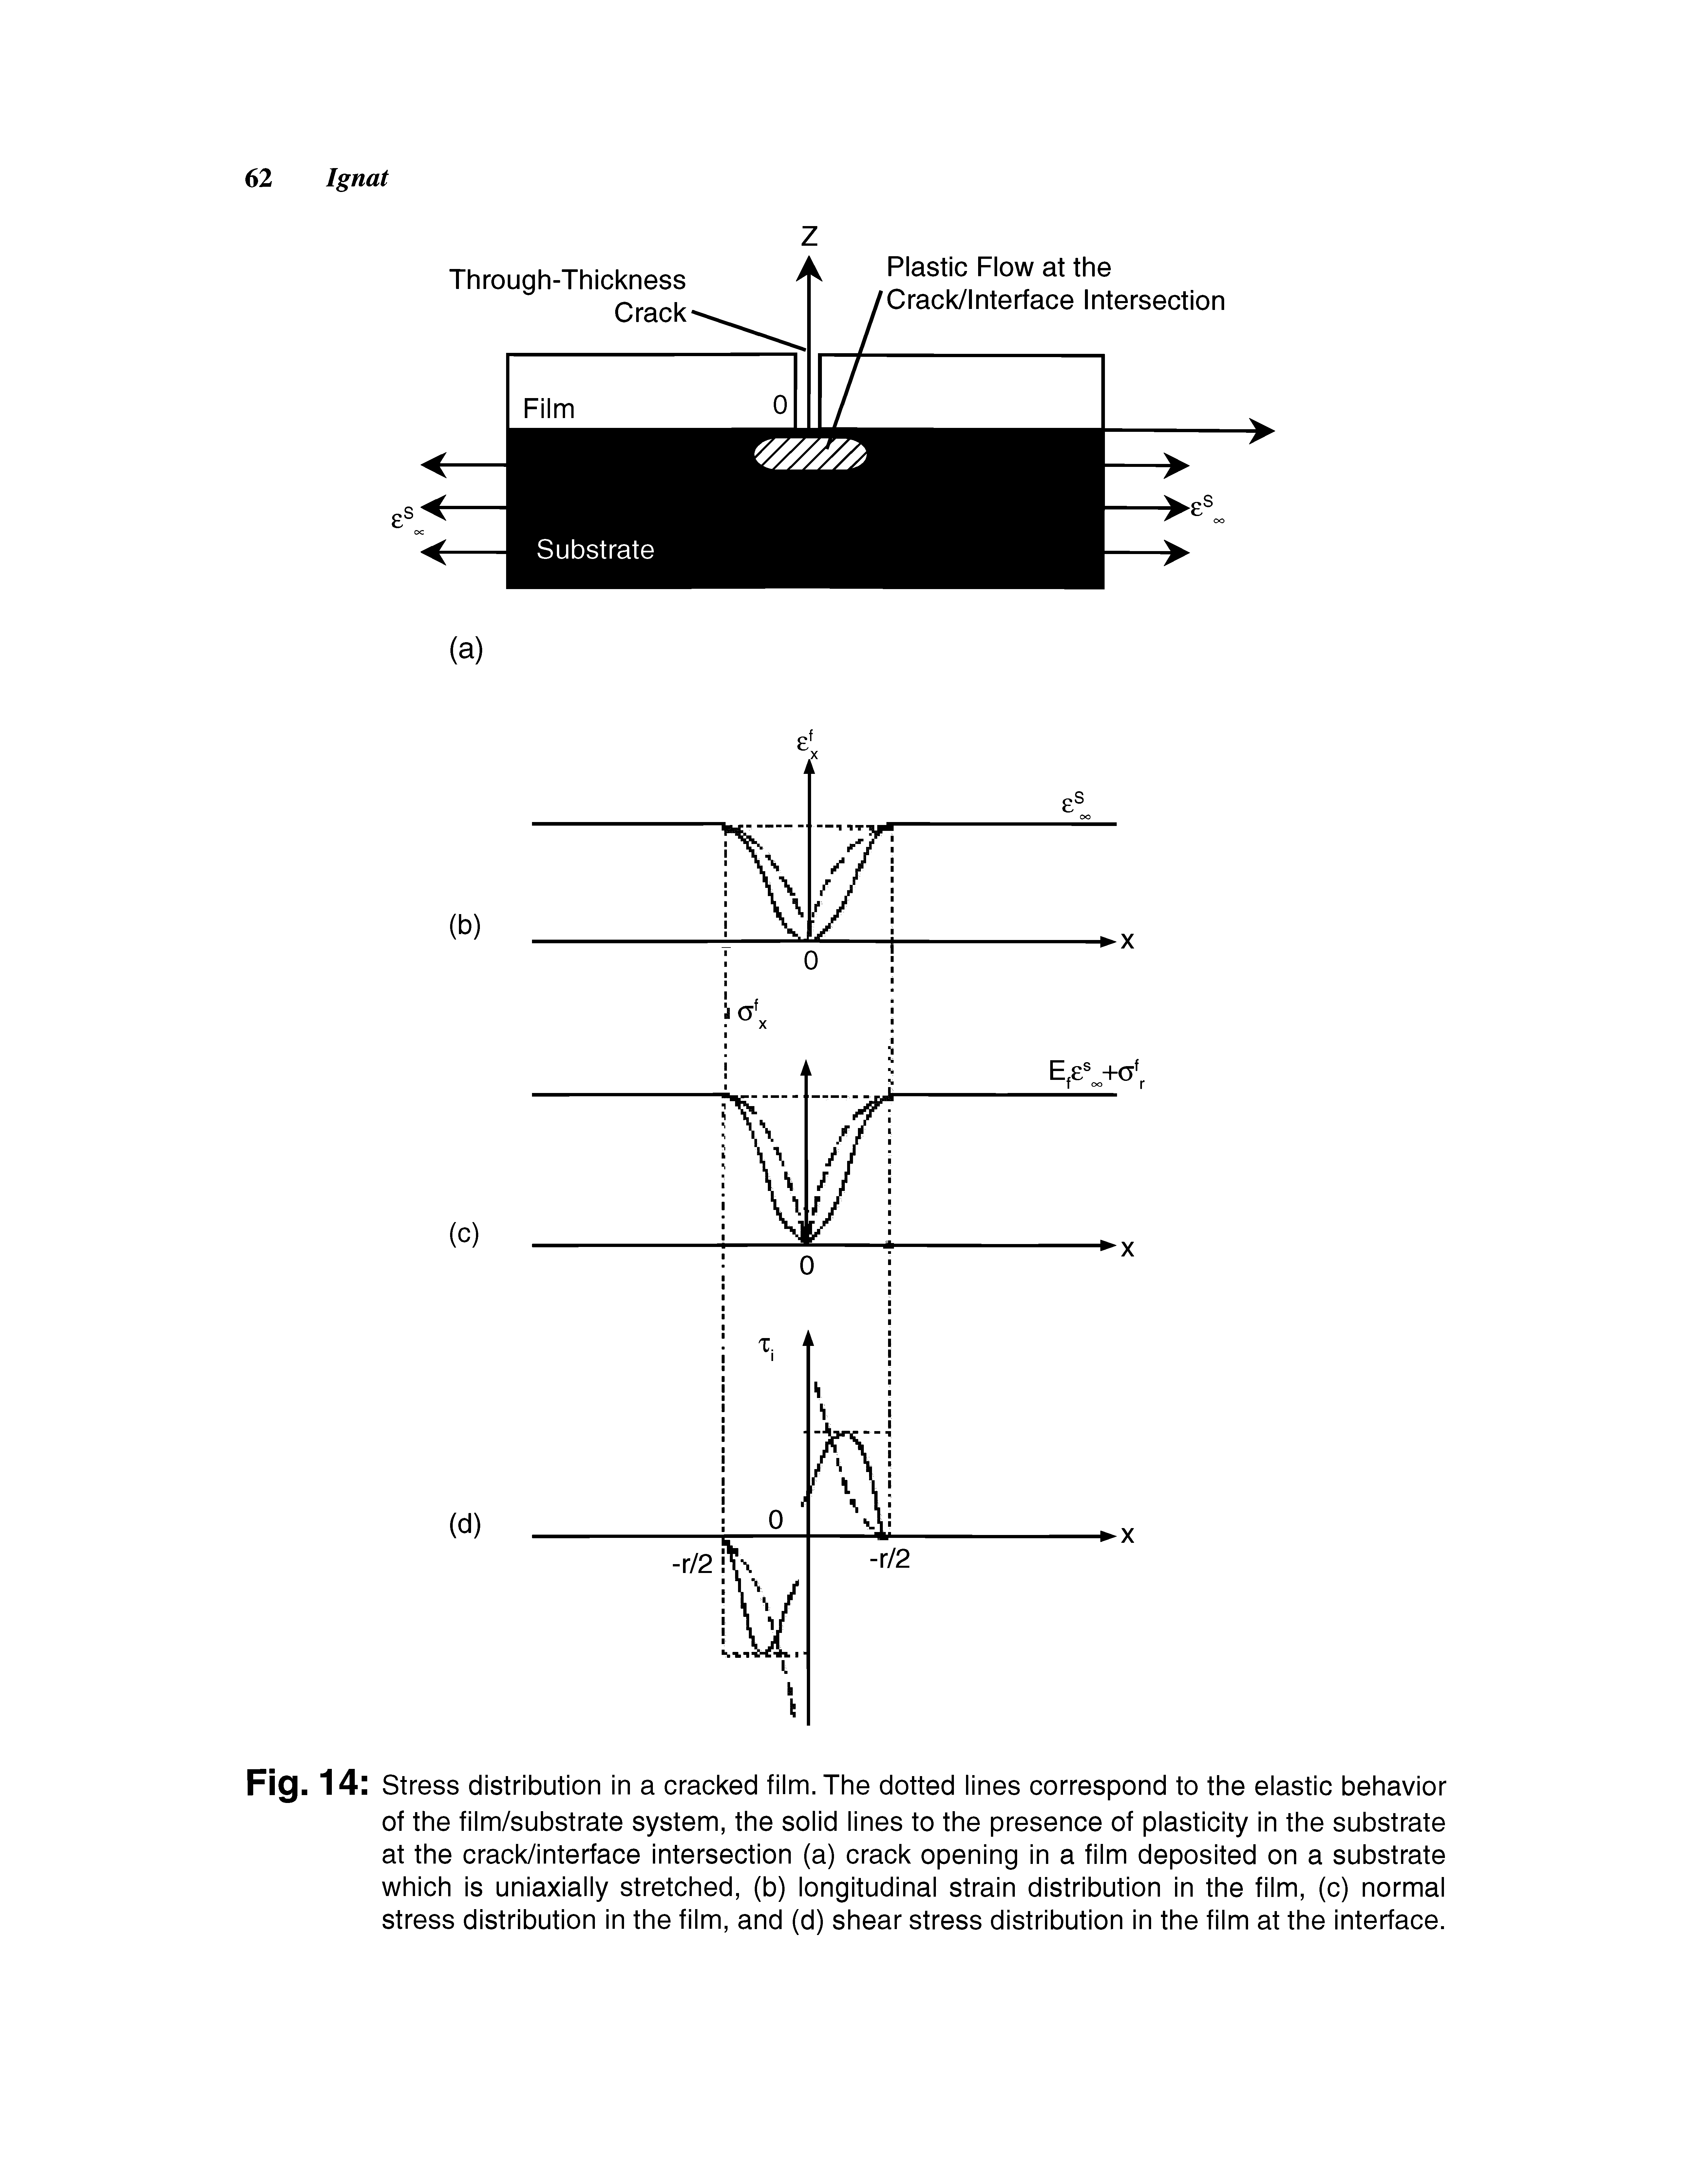 Fig. 14 Stress distribution in a cracked film. The dotted lines correspond to the elastic behavior of the film/substrate system, the solid lines to the presence of plasticity in the substrate at the crack/interface intersection (a) crack opening in a film deposited on a substrate which is uniaxially stretched, (b) longitudinal strain distribution In the film, (c) normal stress distribution in the film, and (d) shear stress distribution In the film at the Interface.